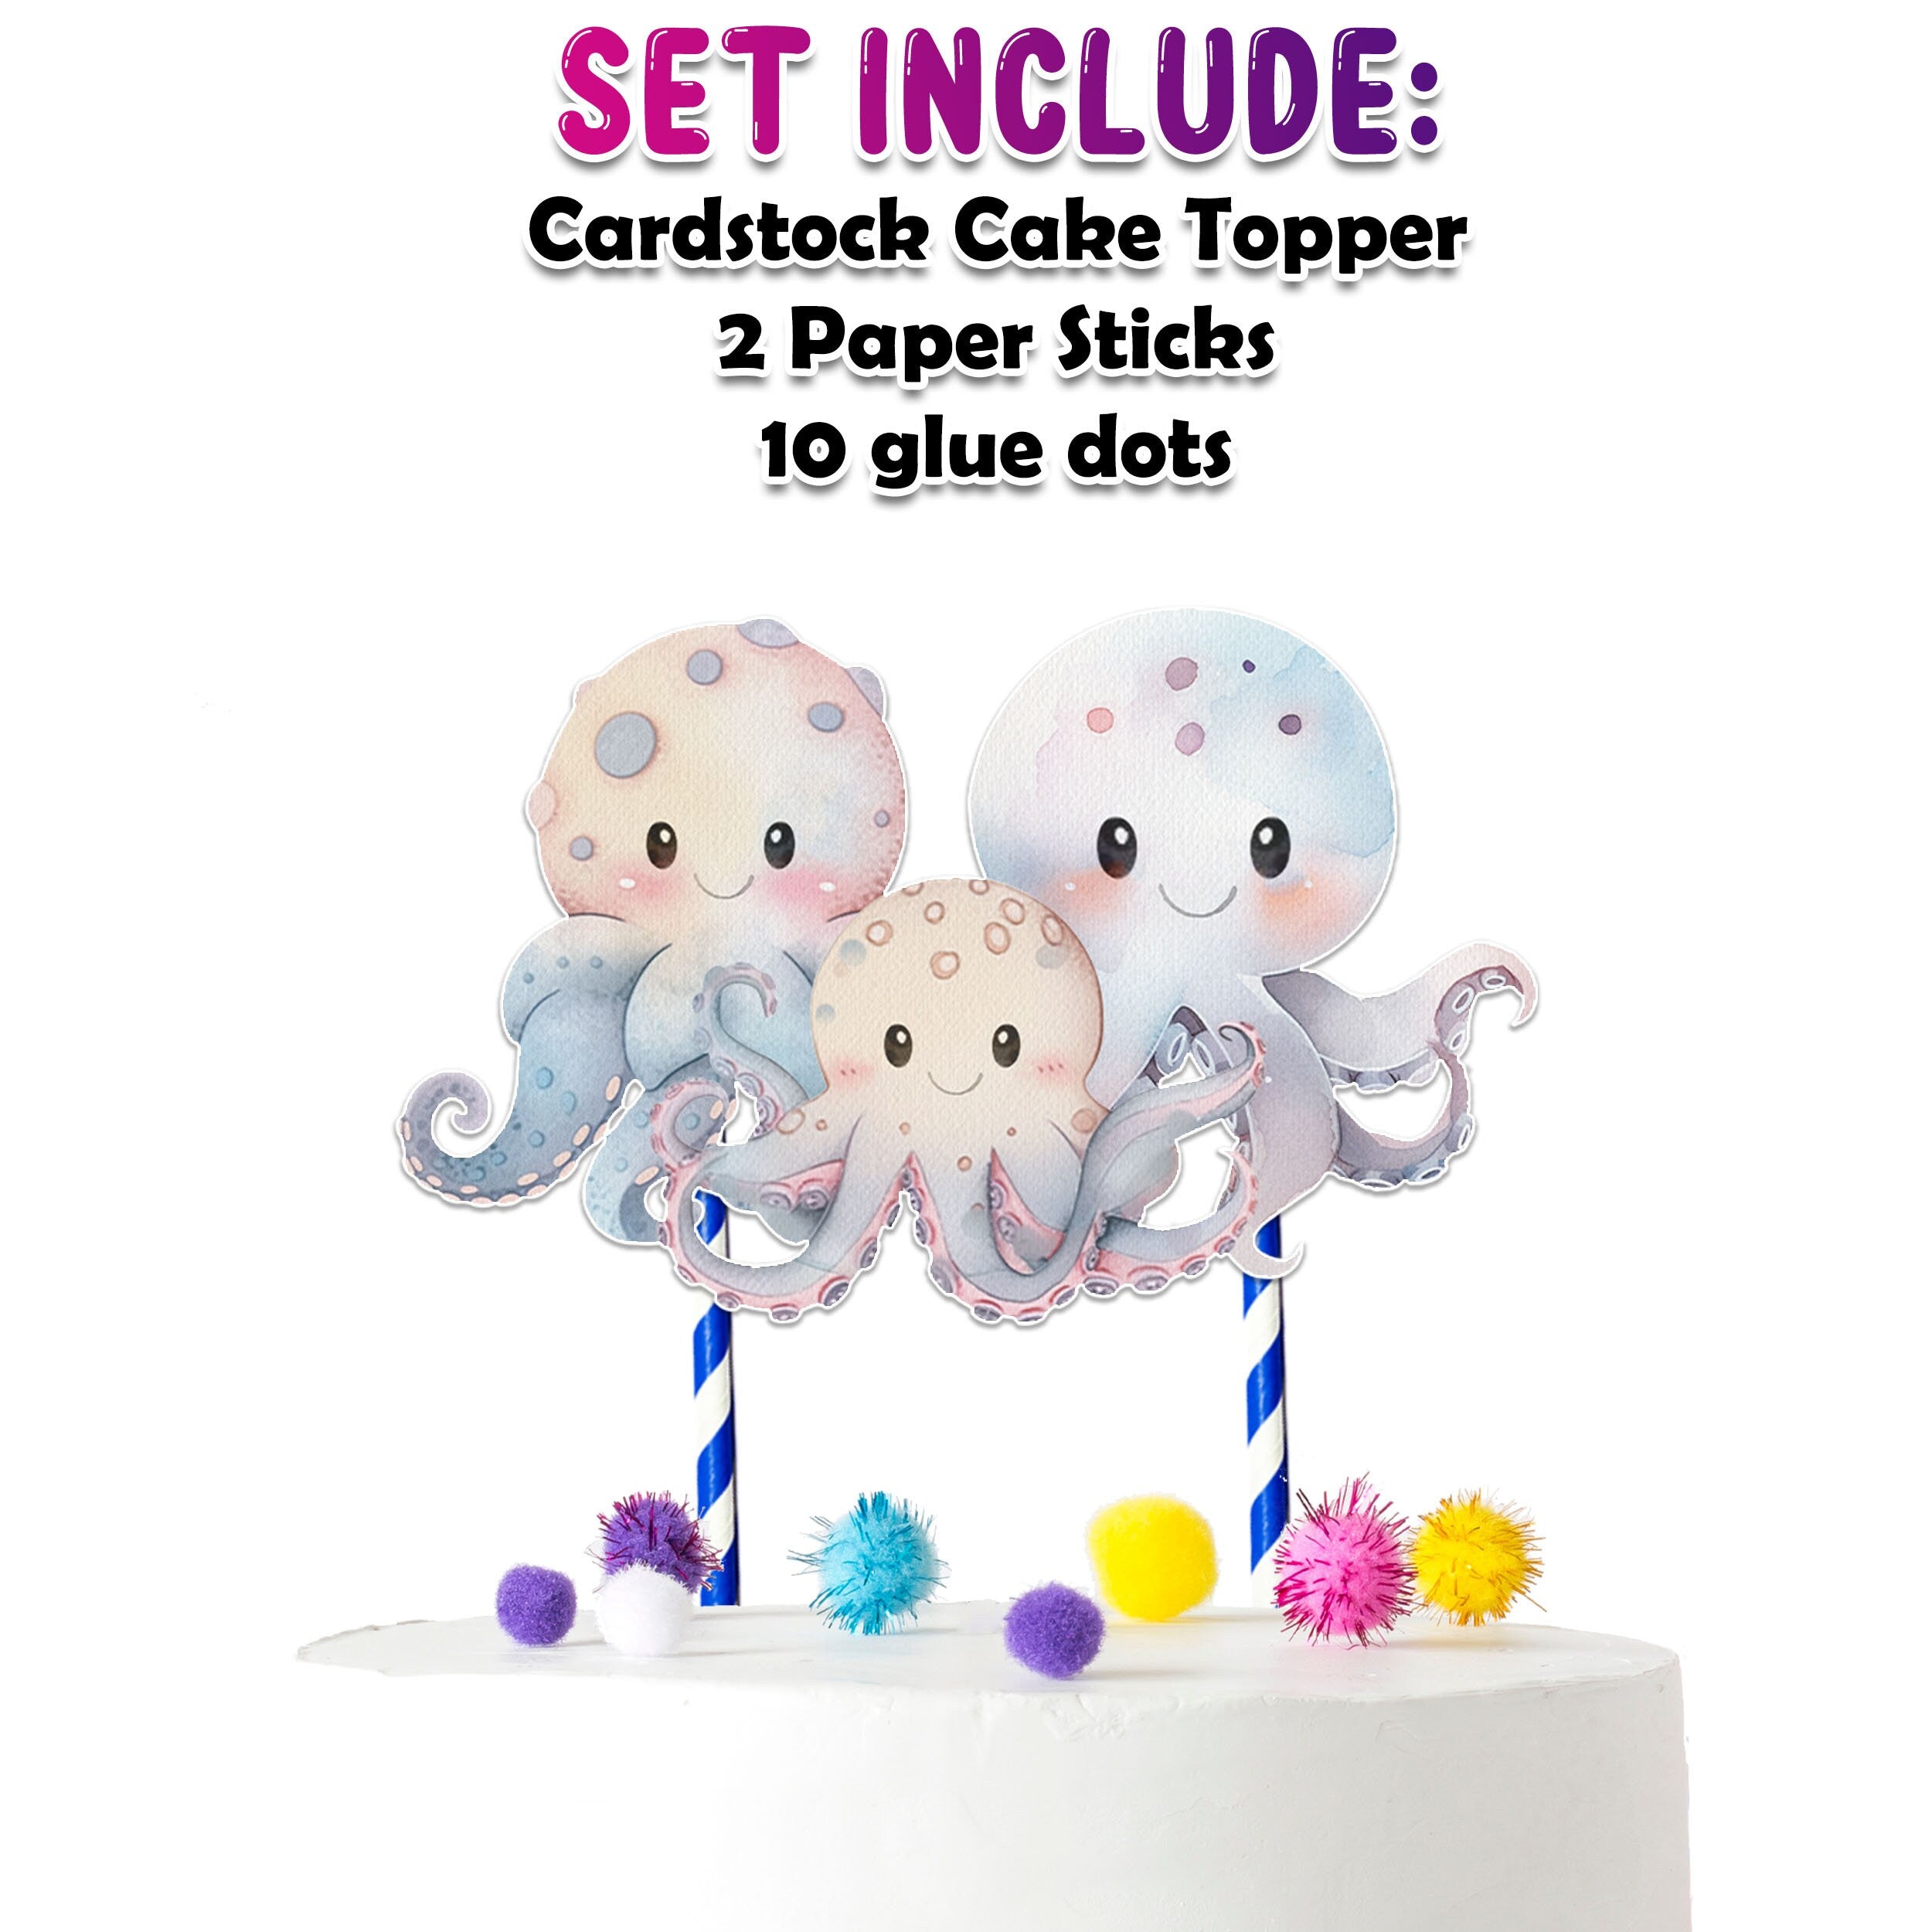 Whimsical Octopus Cake Topper – Perfect for Baby Showers and Birthday Celebrations